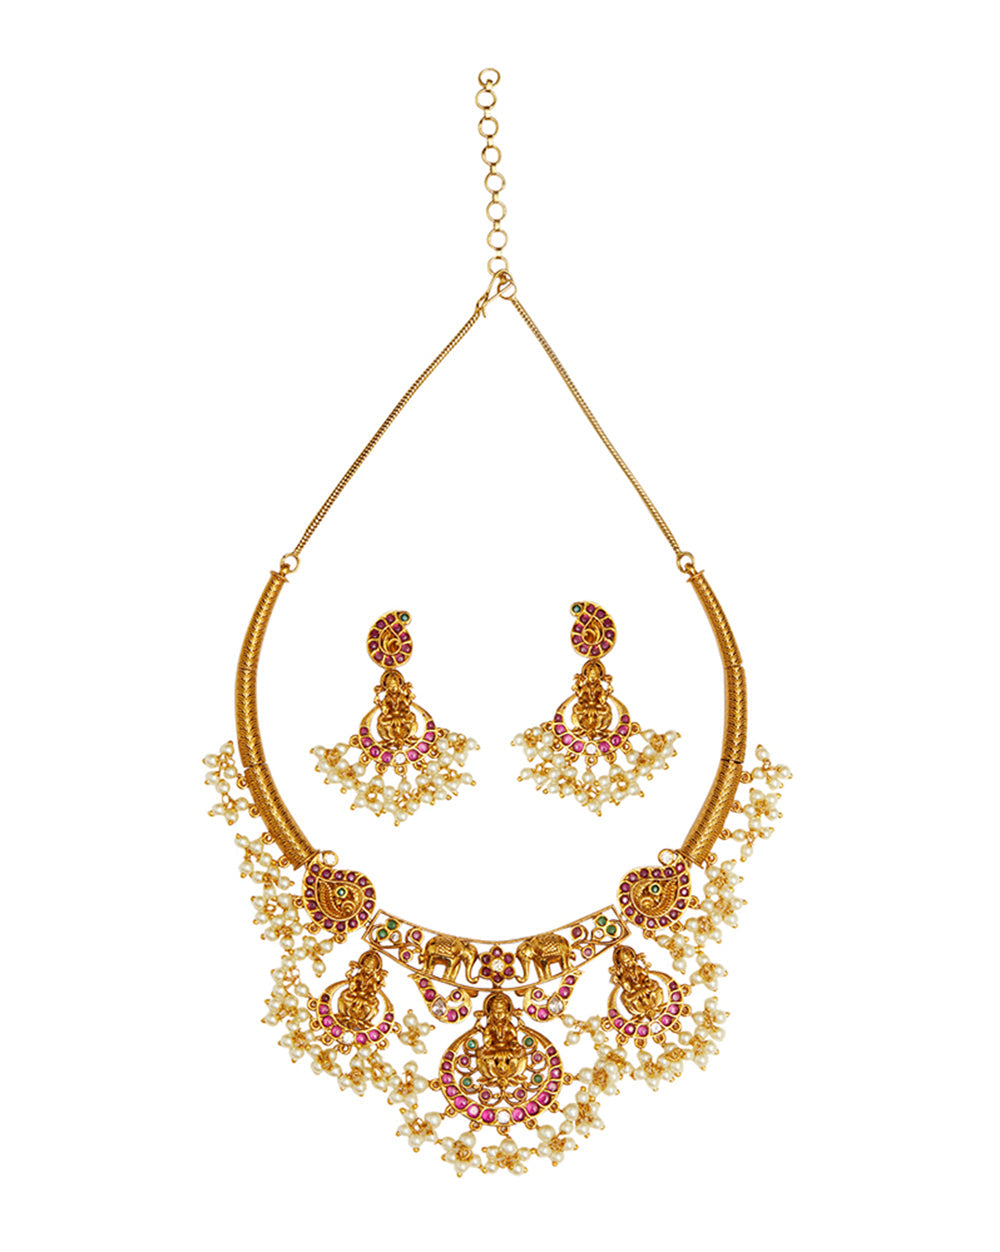 Women's Temple Design Brass Faux Pearls Embellished Gold Plated Hasli Jewellery Set - Voylla